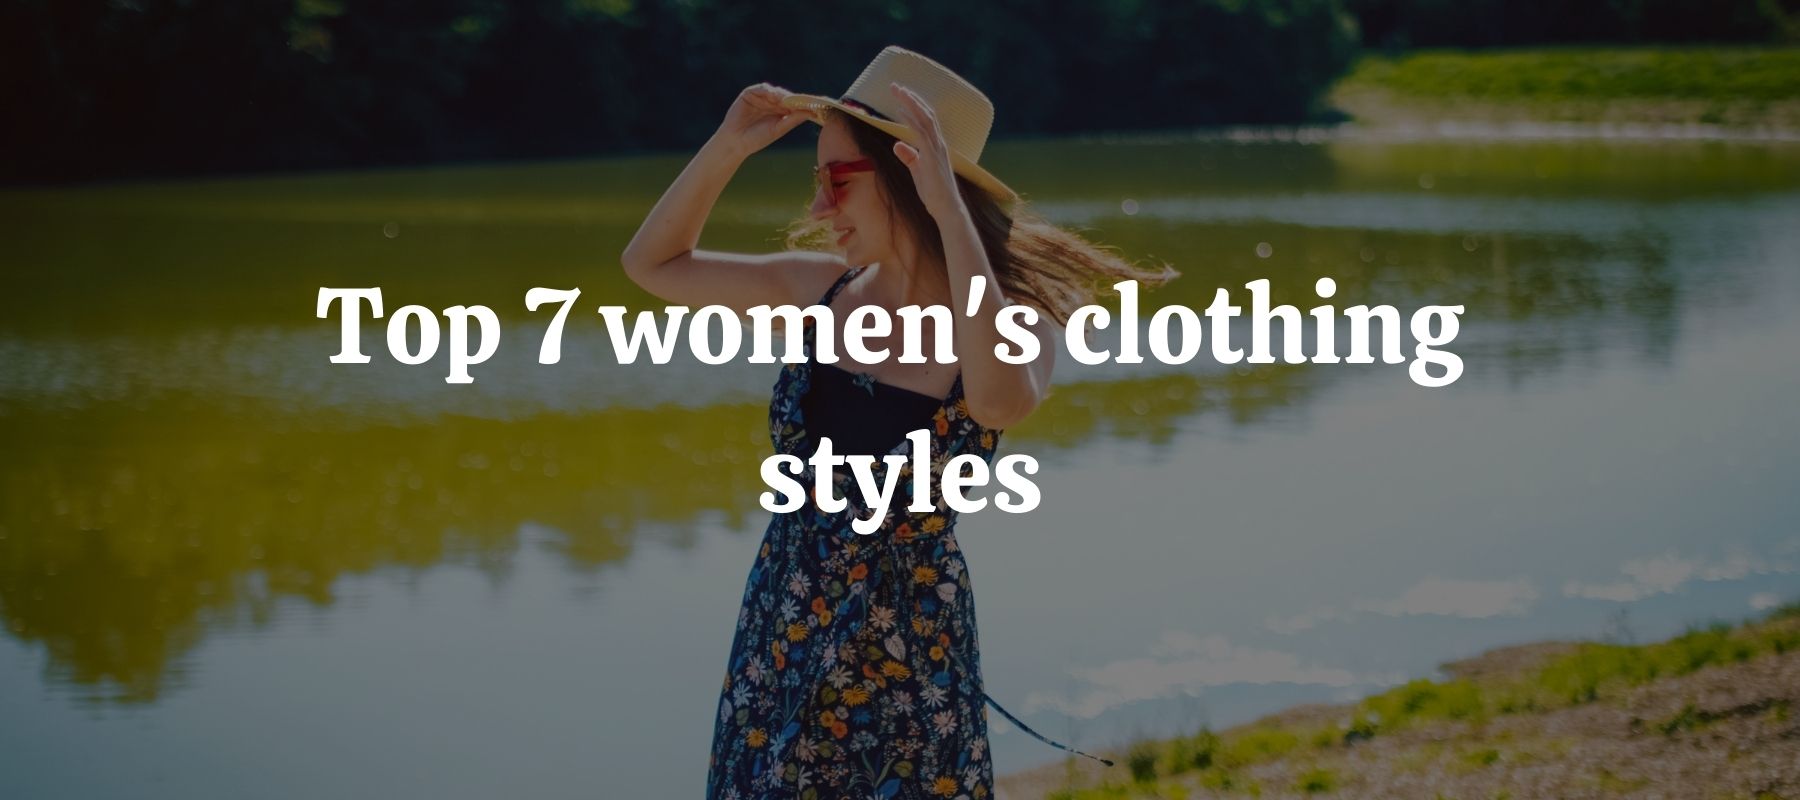 Top 7 women's clothing styles